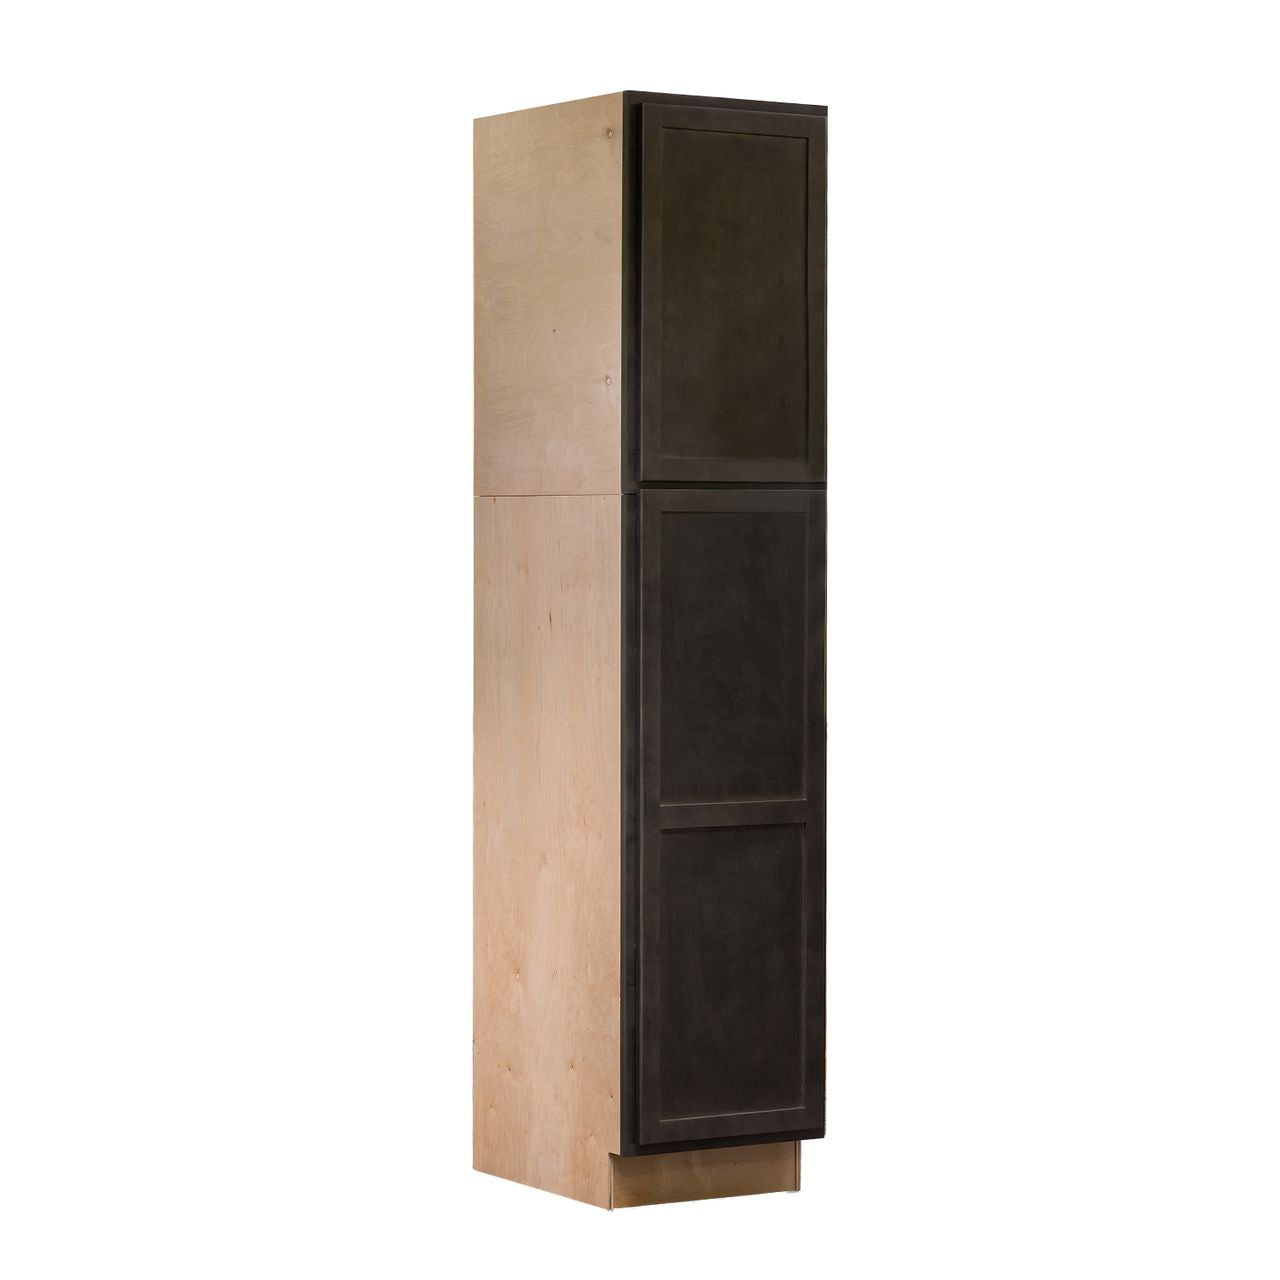 Quicklock RTA (Ready-to-Assemble) Espresso Stain Pantry Cabinet- 24"W